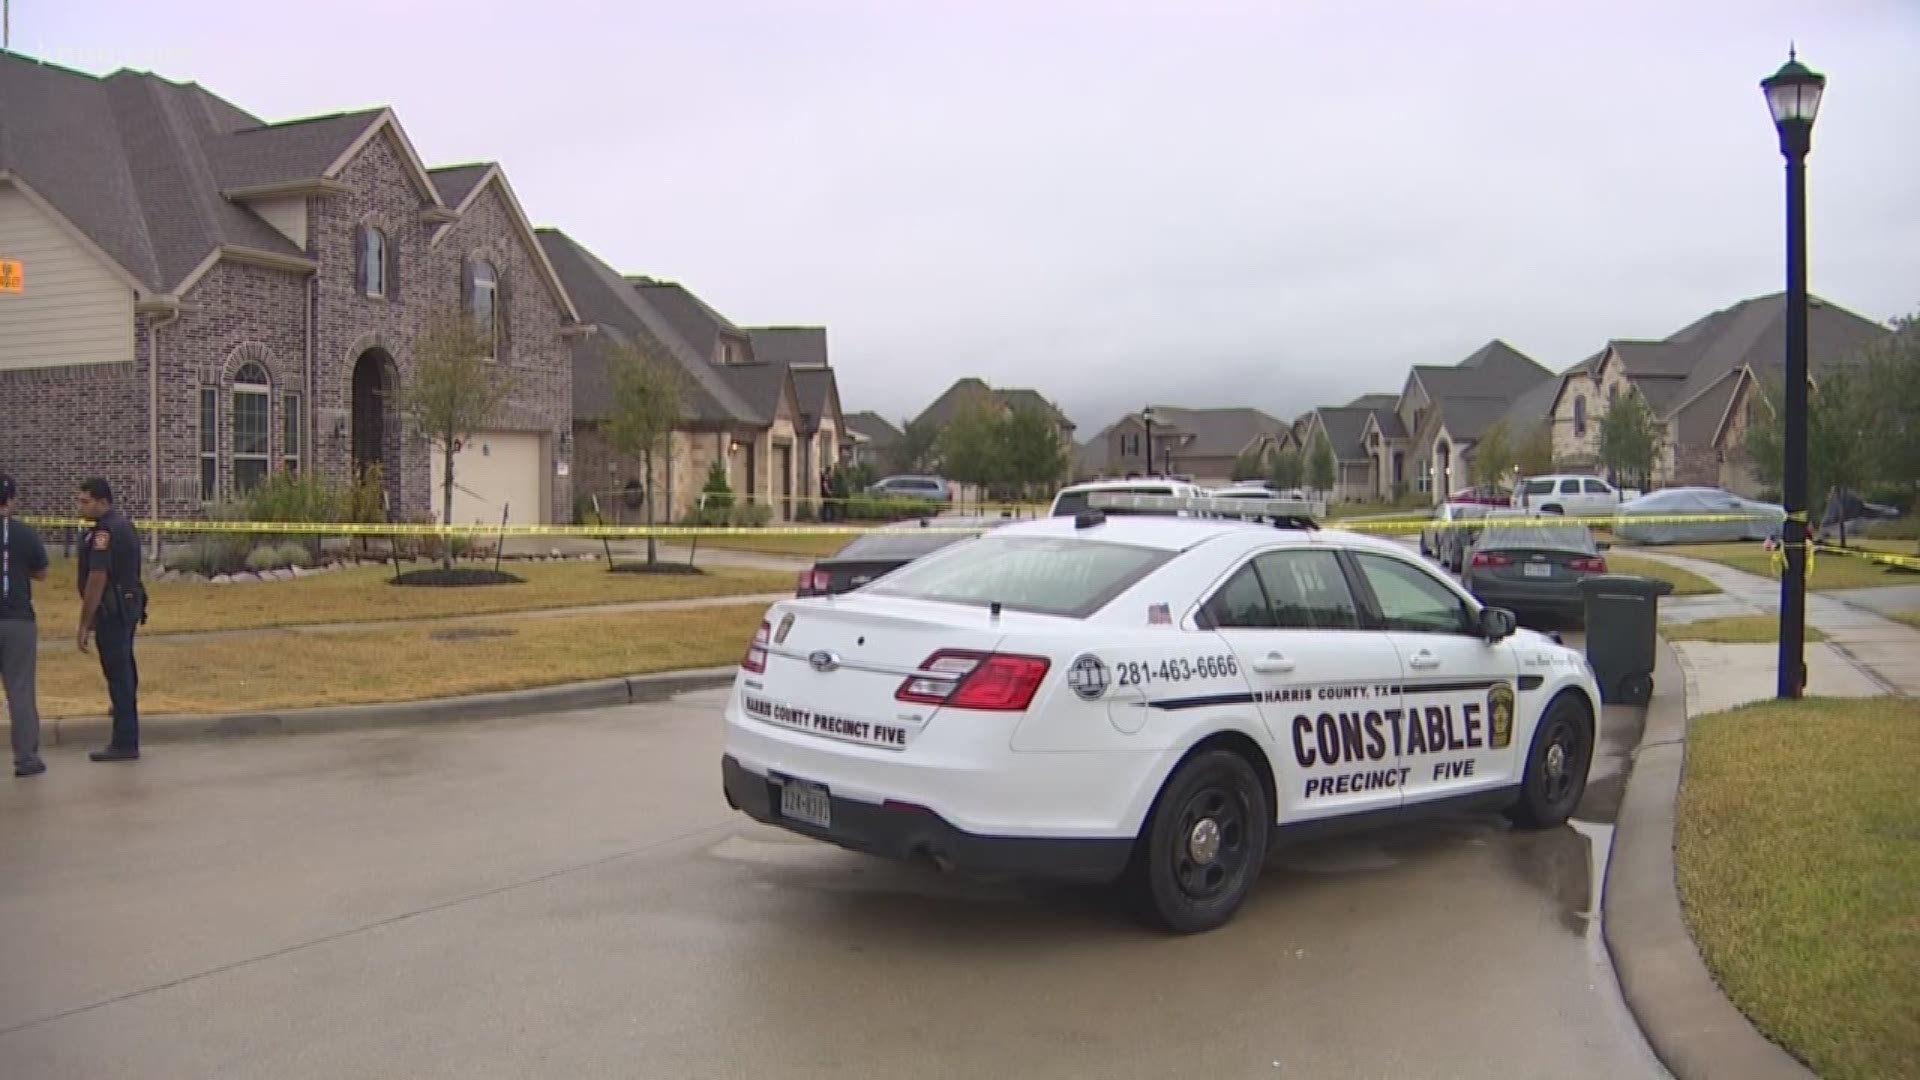 One person died after a home invasion in Cypress Thursday afternoon, according to the Harris County Sheriff's Office.